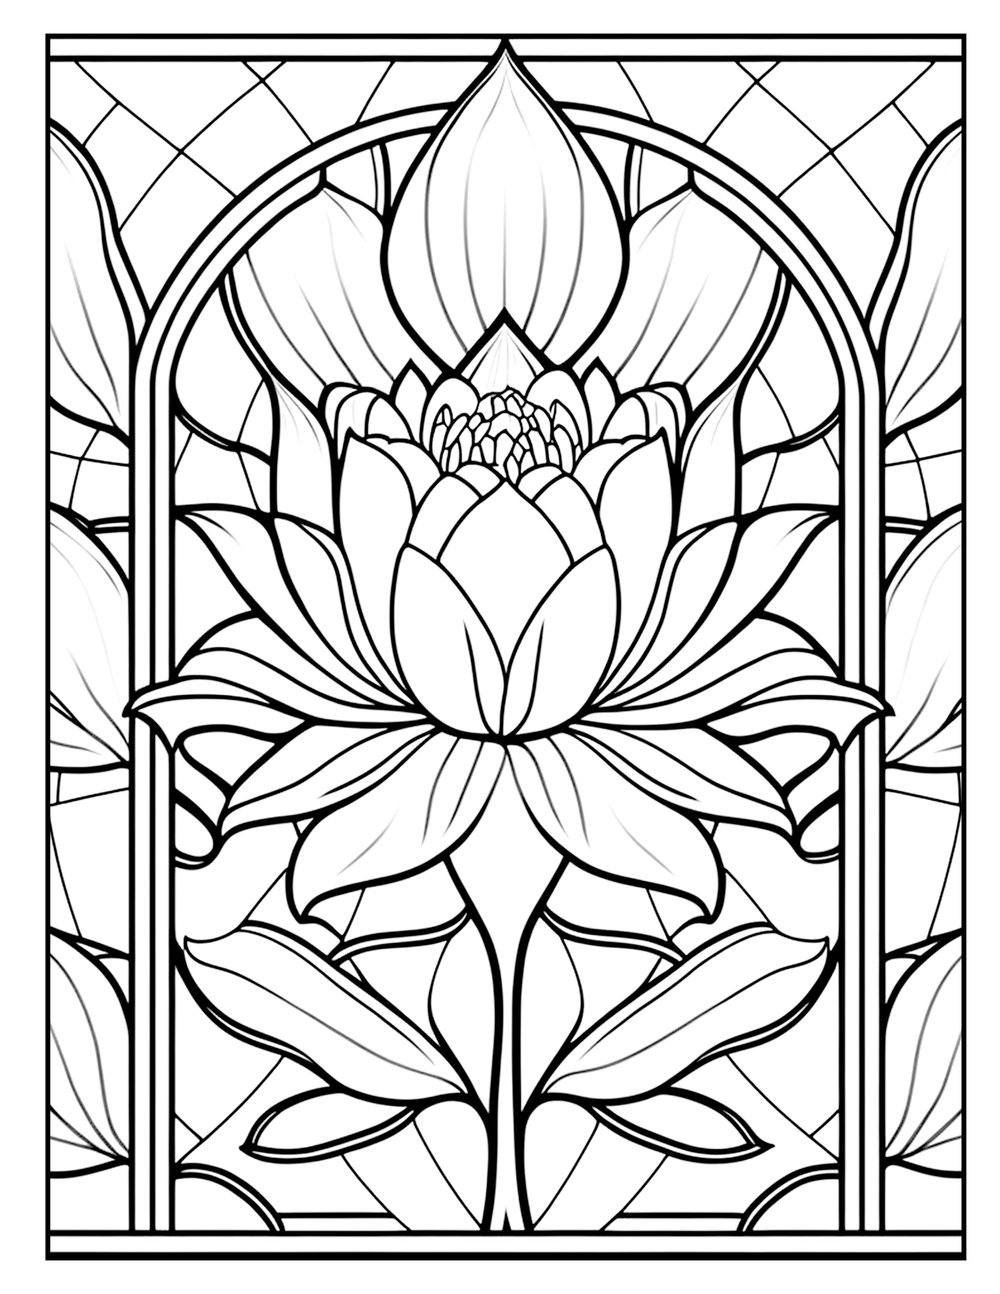 Ai dreams stained glass coloring book images â chris nelson